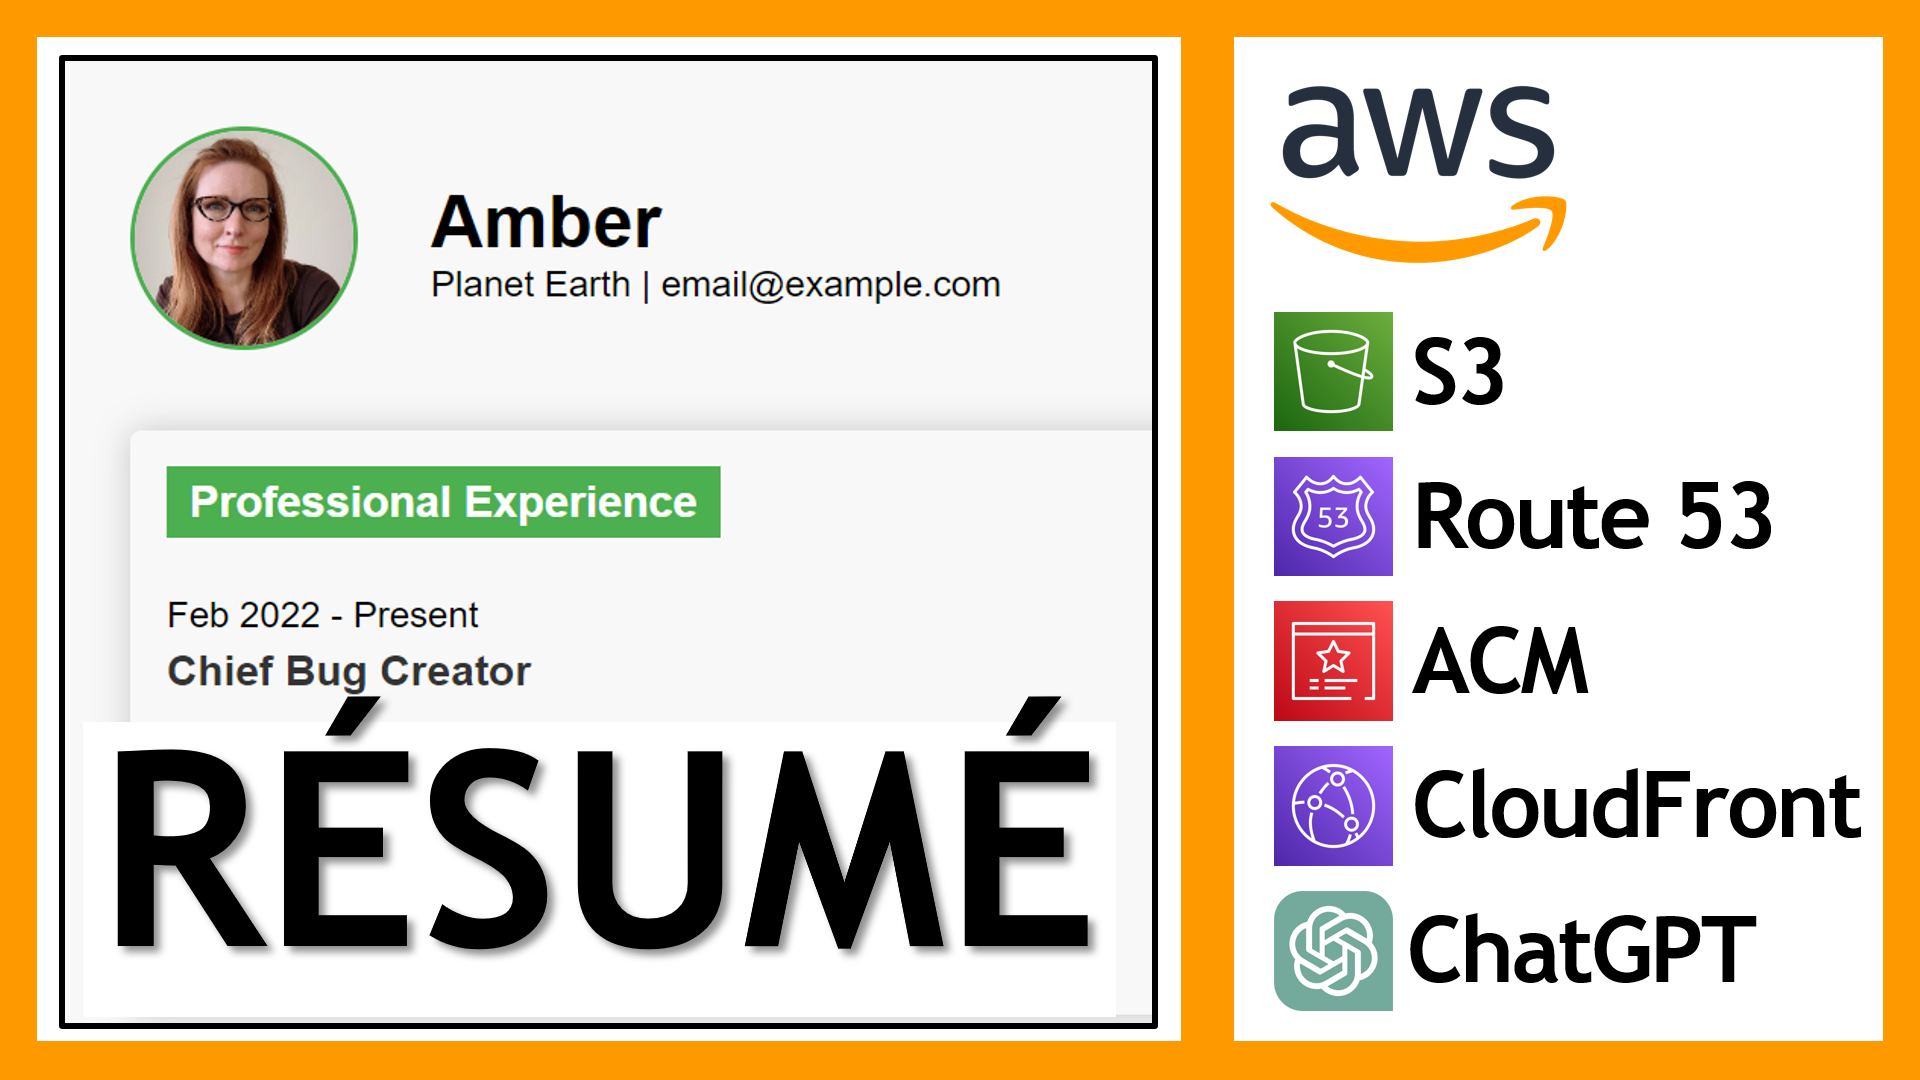 How to Build an Online Résumé on AWS Using S3, Route 53, CloudFront, and ACM